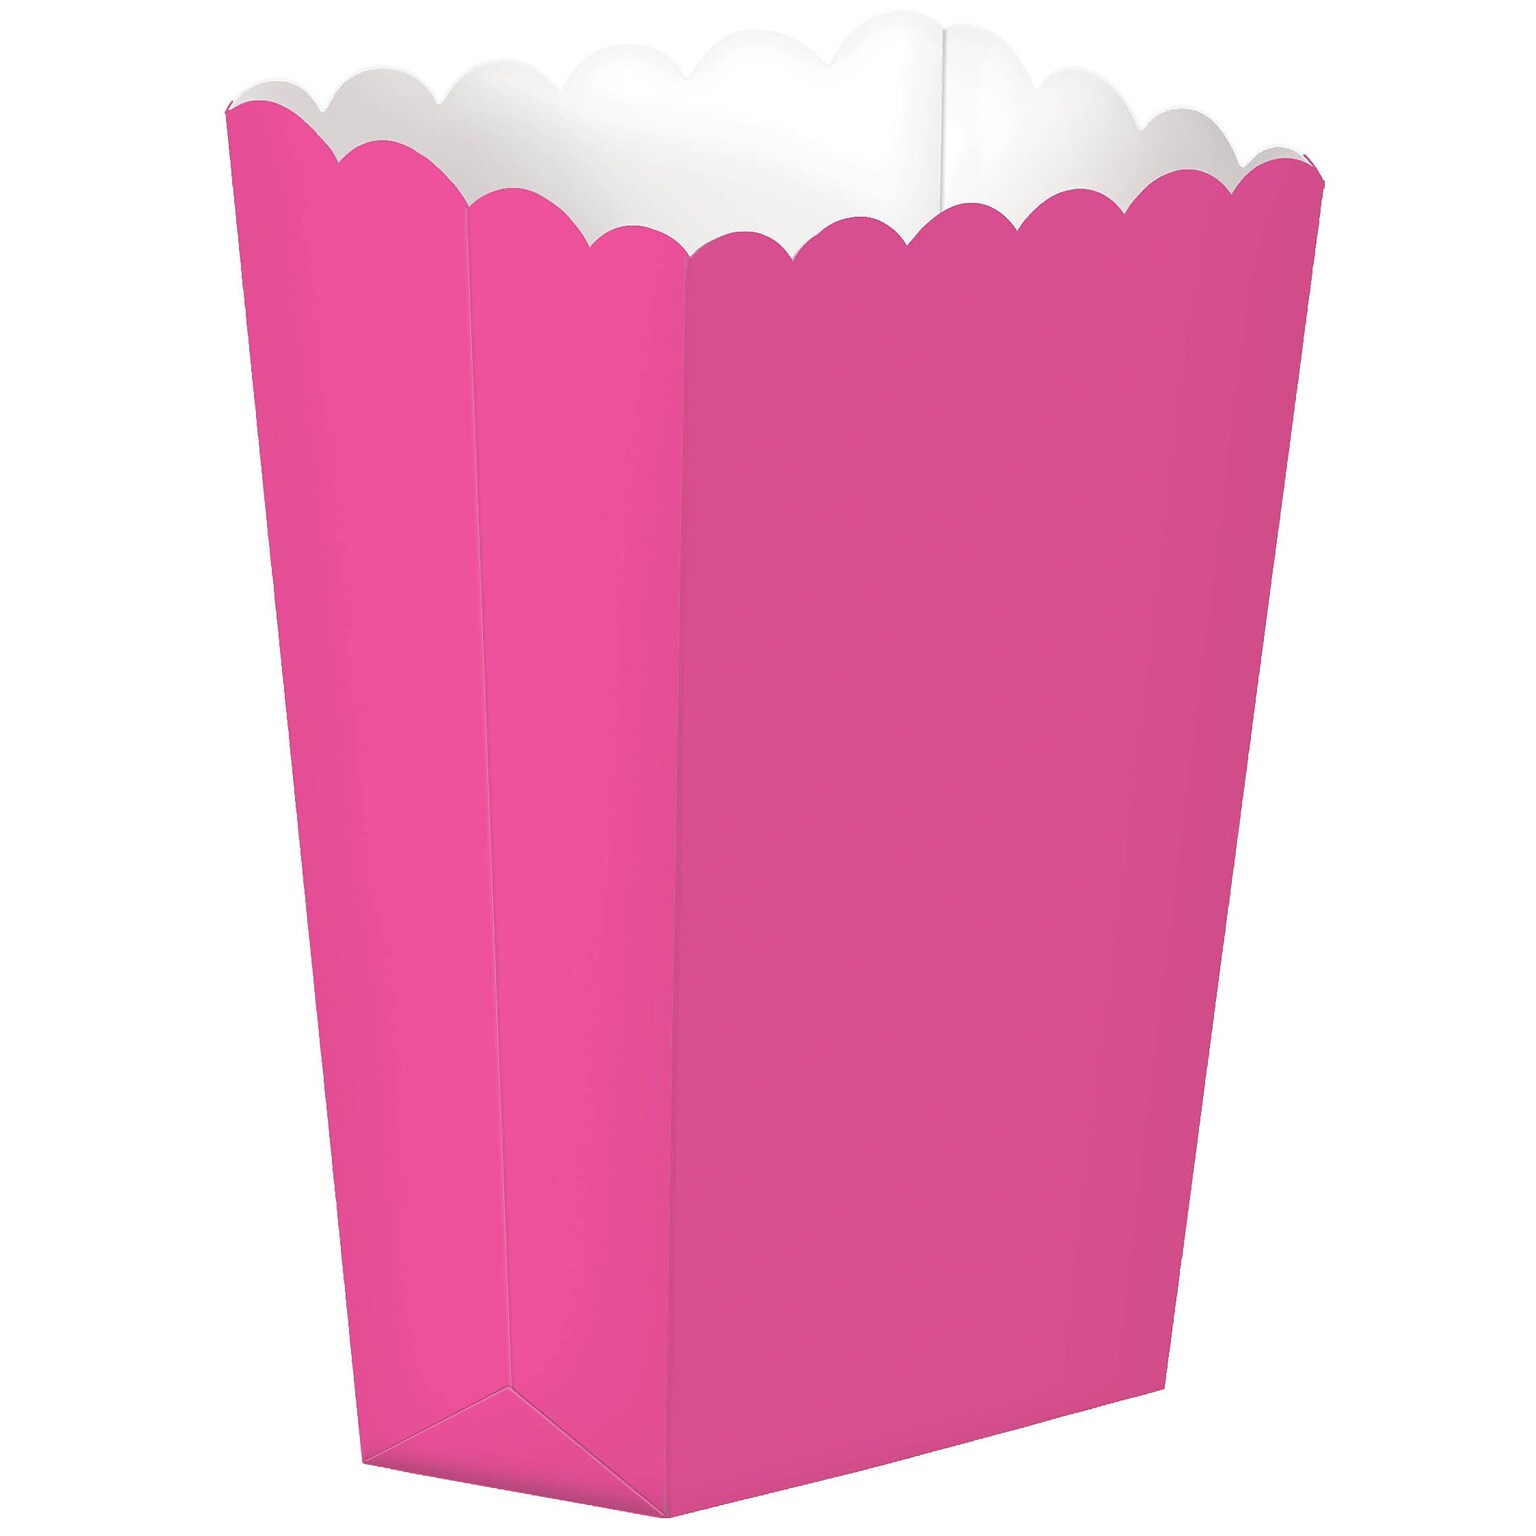 Amscan Paper Popcorn Boxes; 5.25H x 2.5W, Bright Pink, 12/Pack, 5 Per Pack (370221.103)